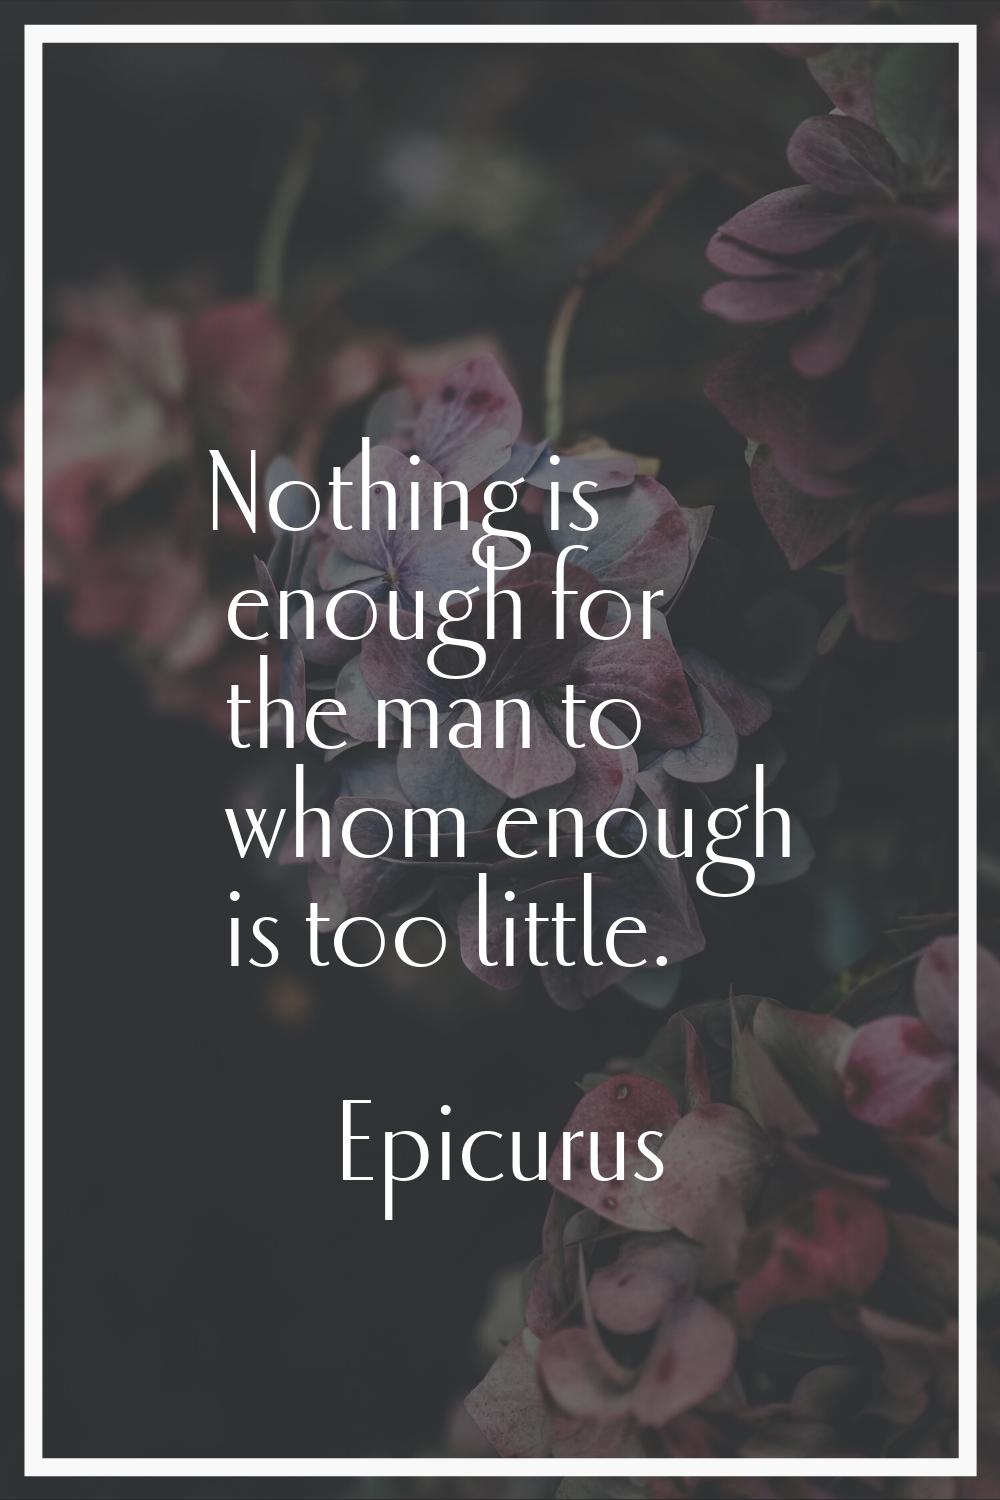 Nothing is enough for the man to whom enough is too little.